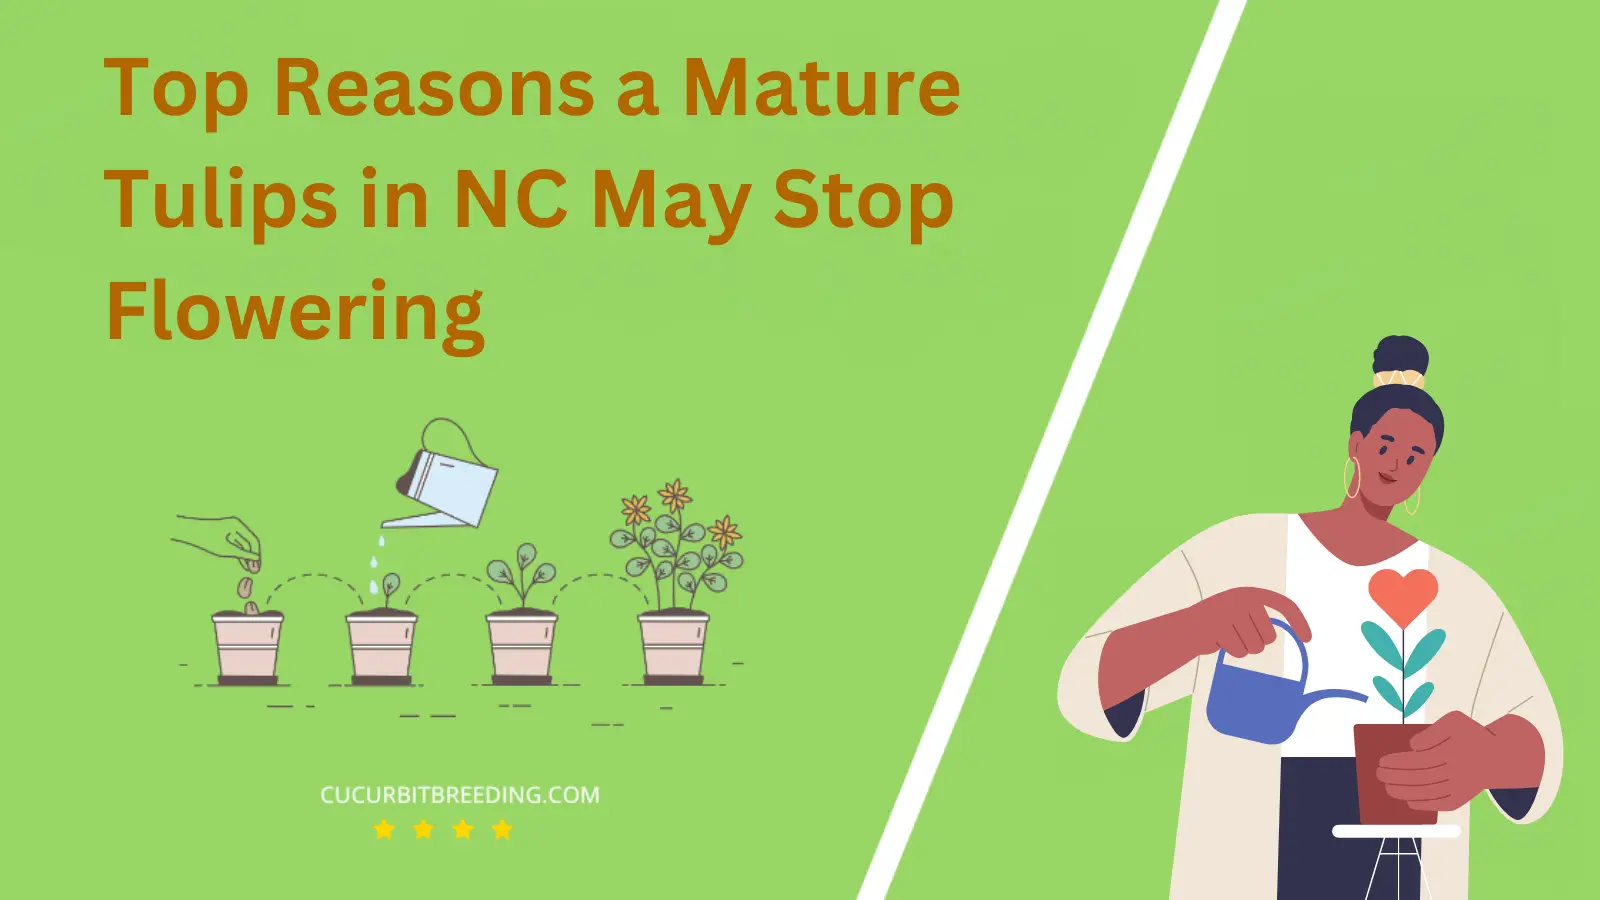 Top Reasons a Mature Tulips in NC May Stop Flowering